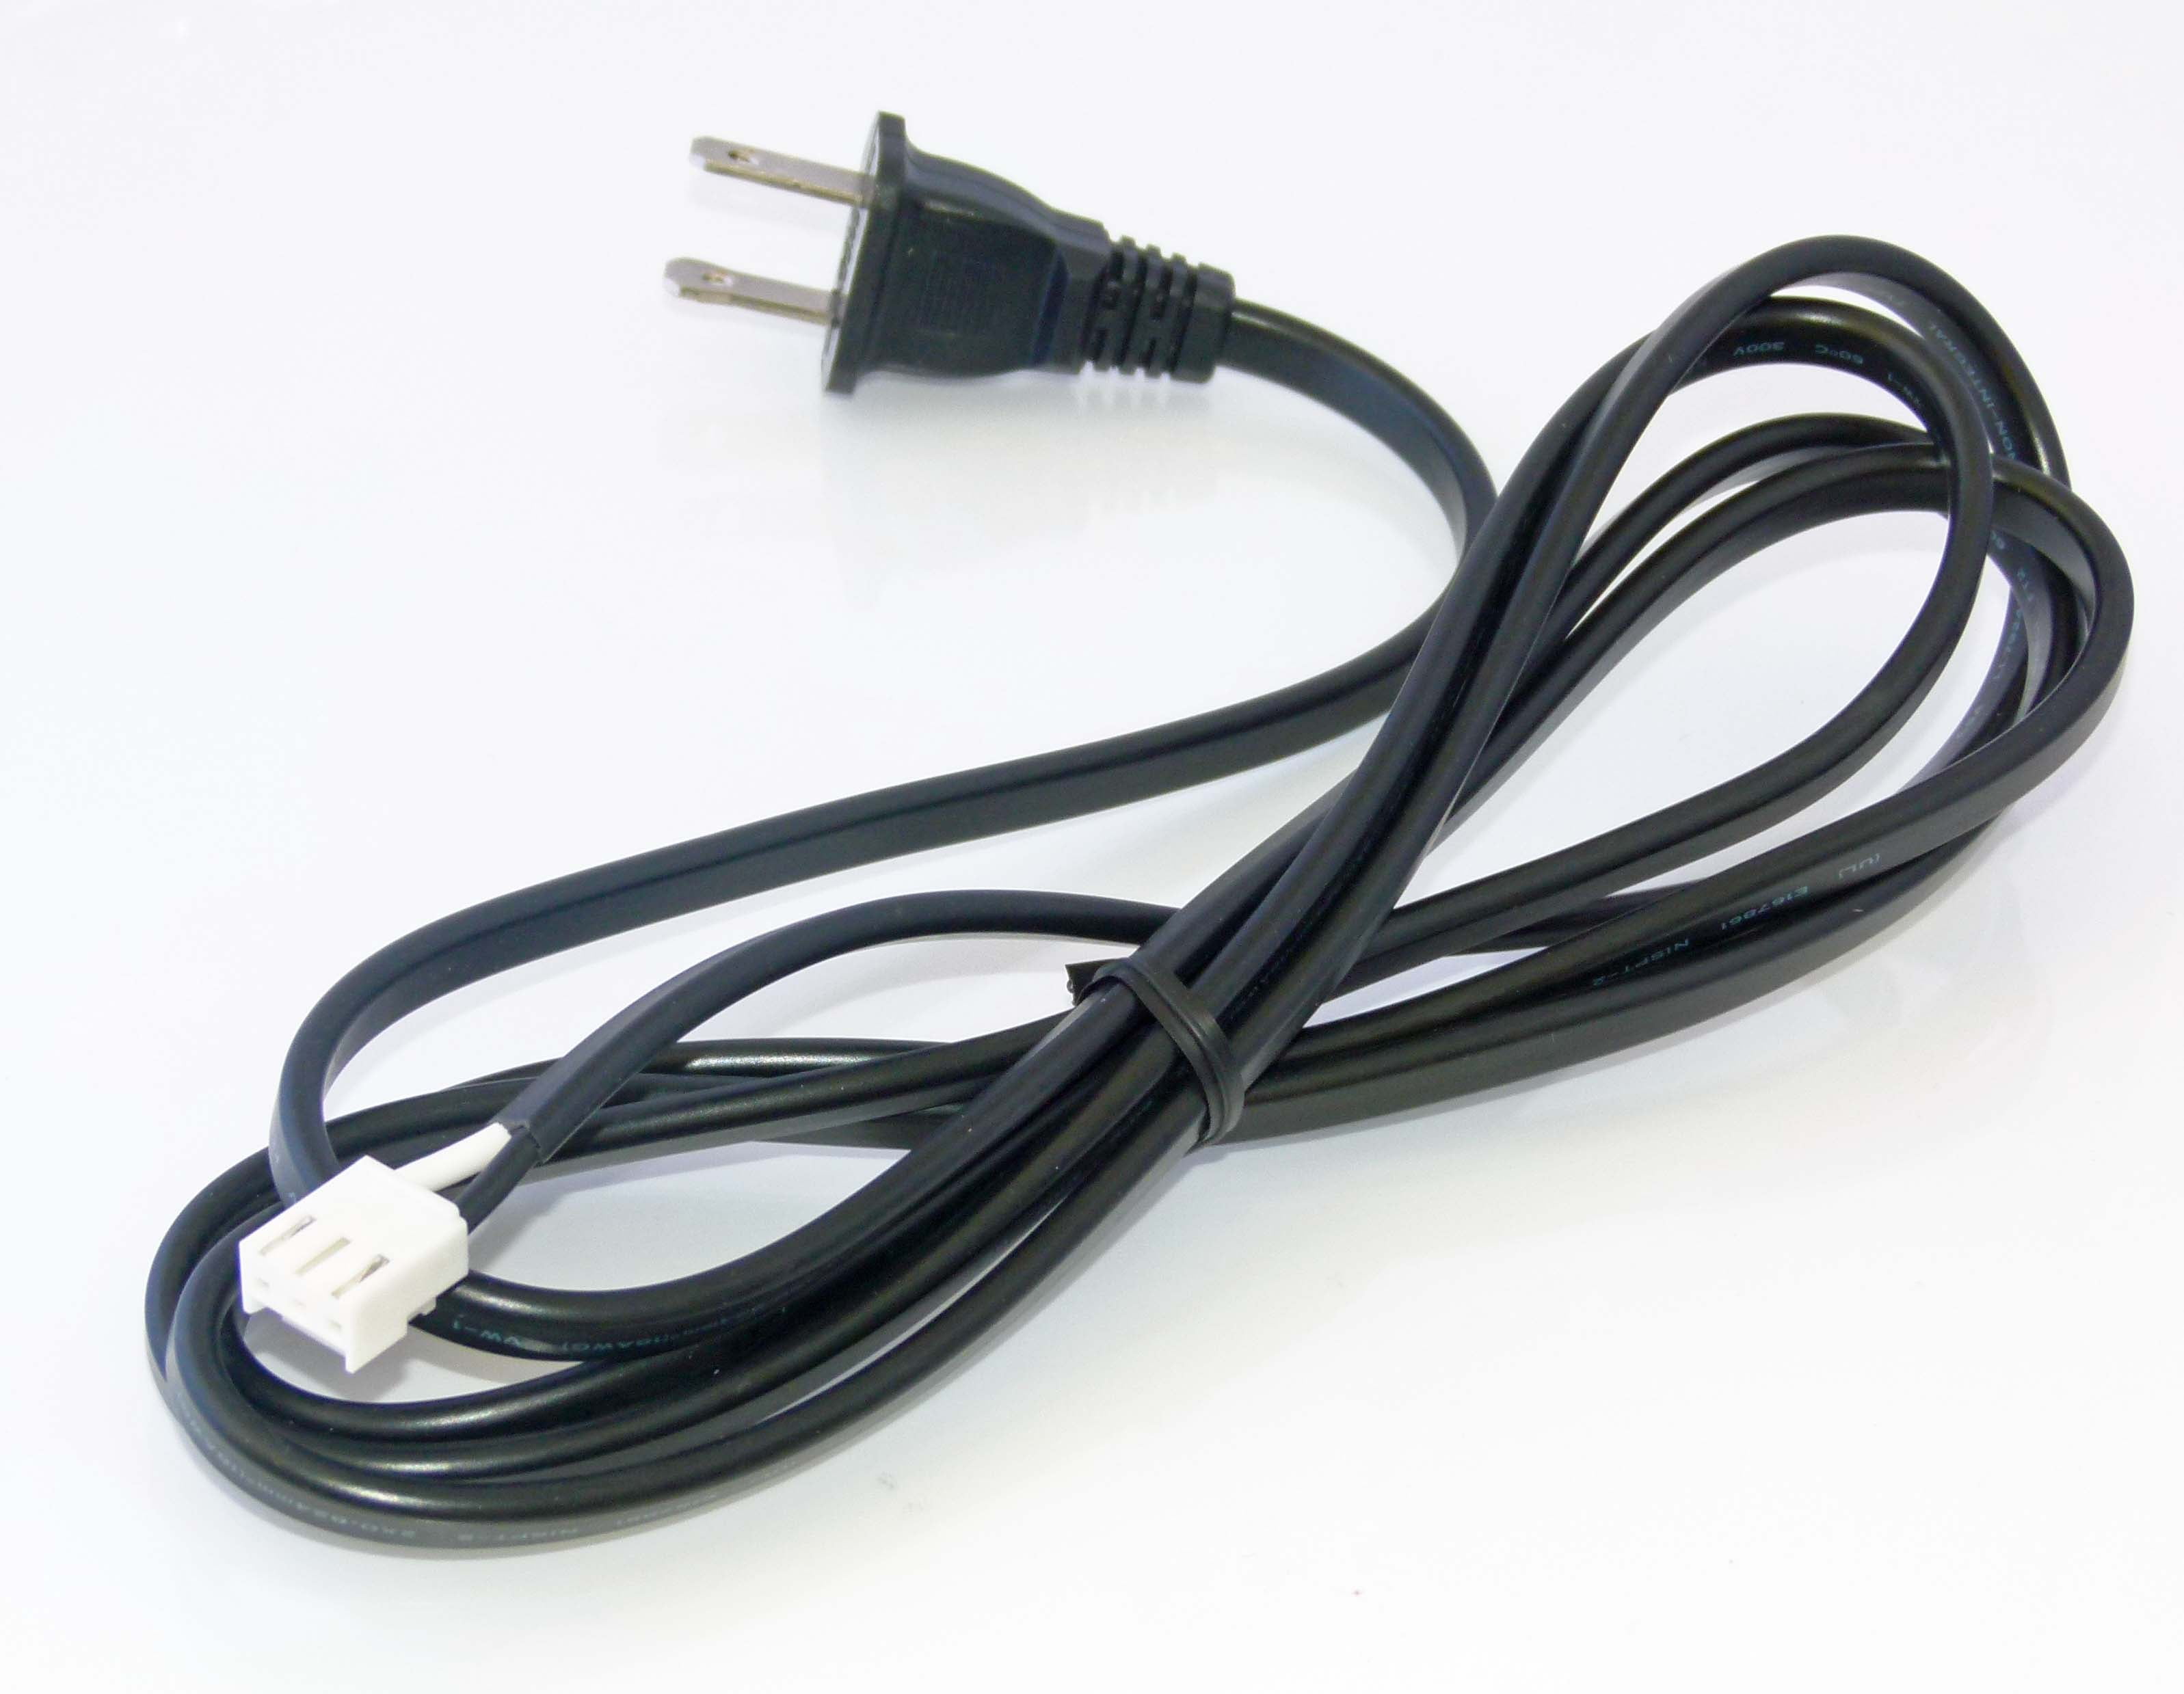 NEW OEM Denon Power Cord Cable Originally Shipped With: AVR790, AVR-790